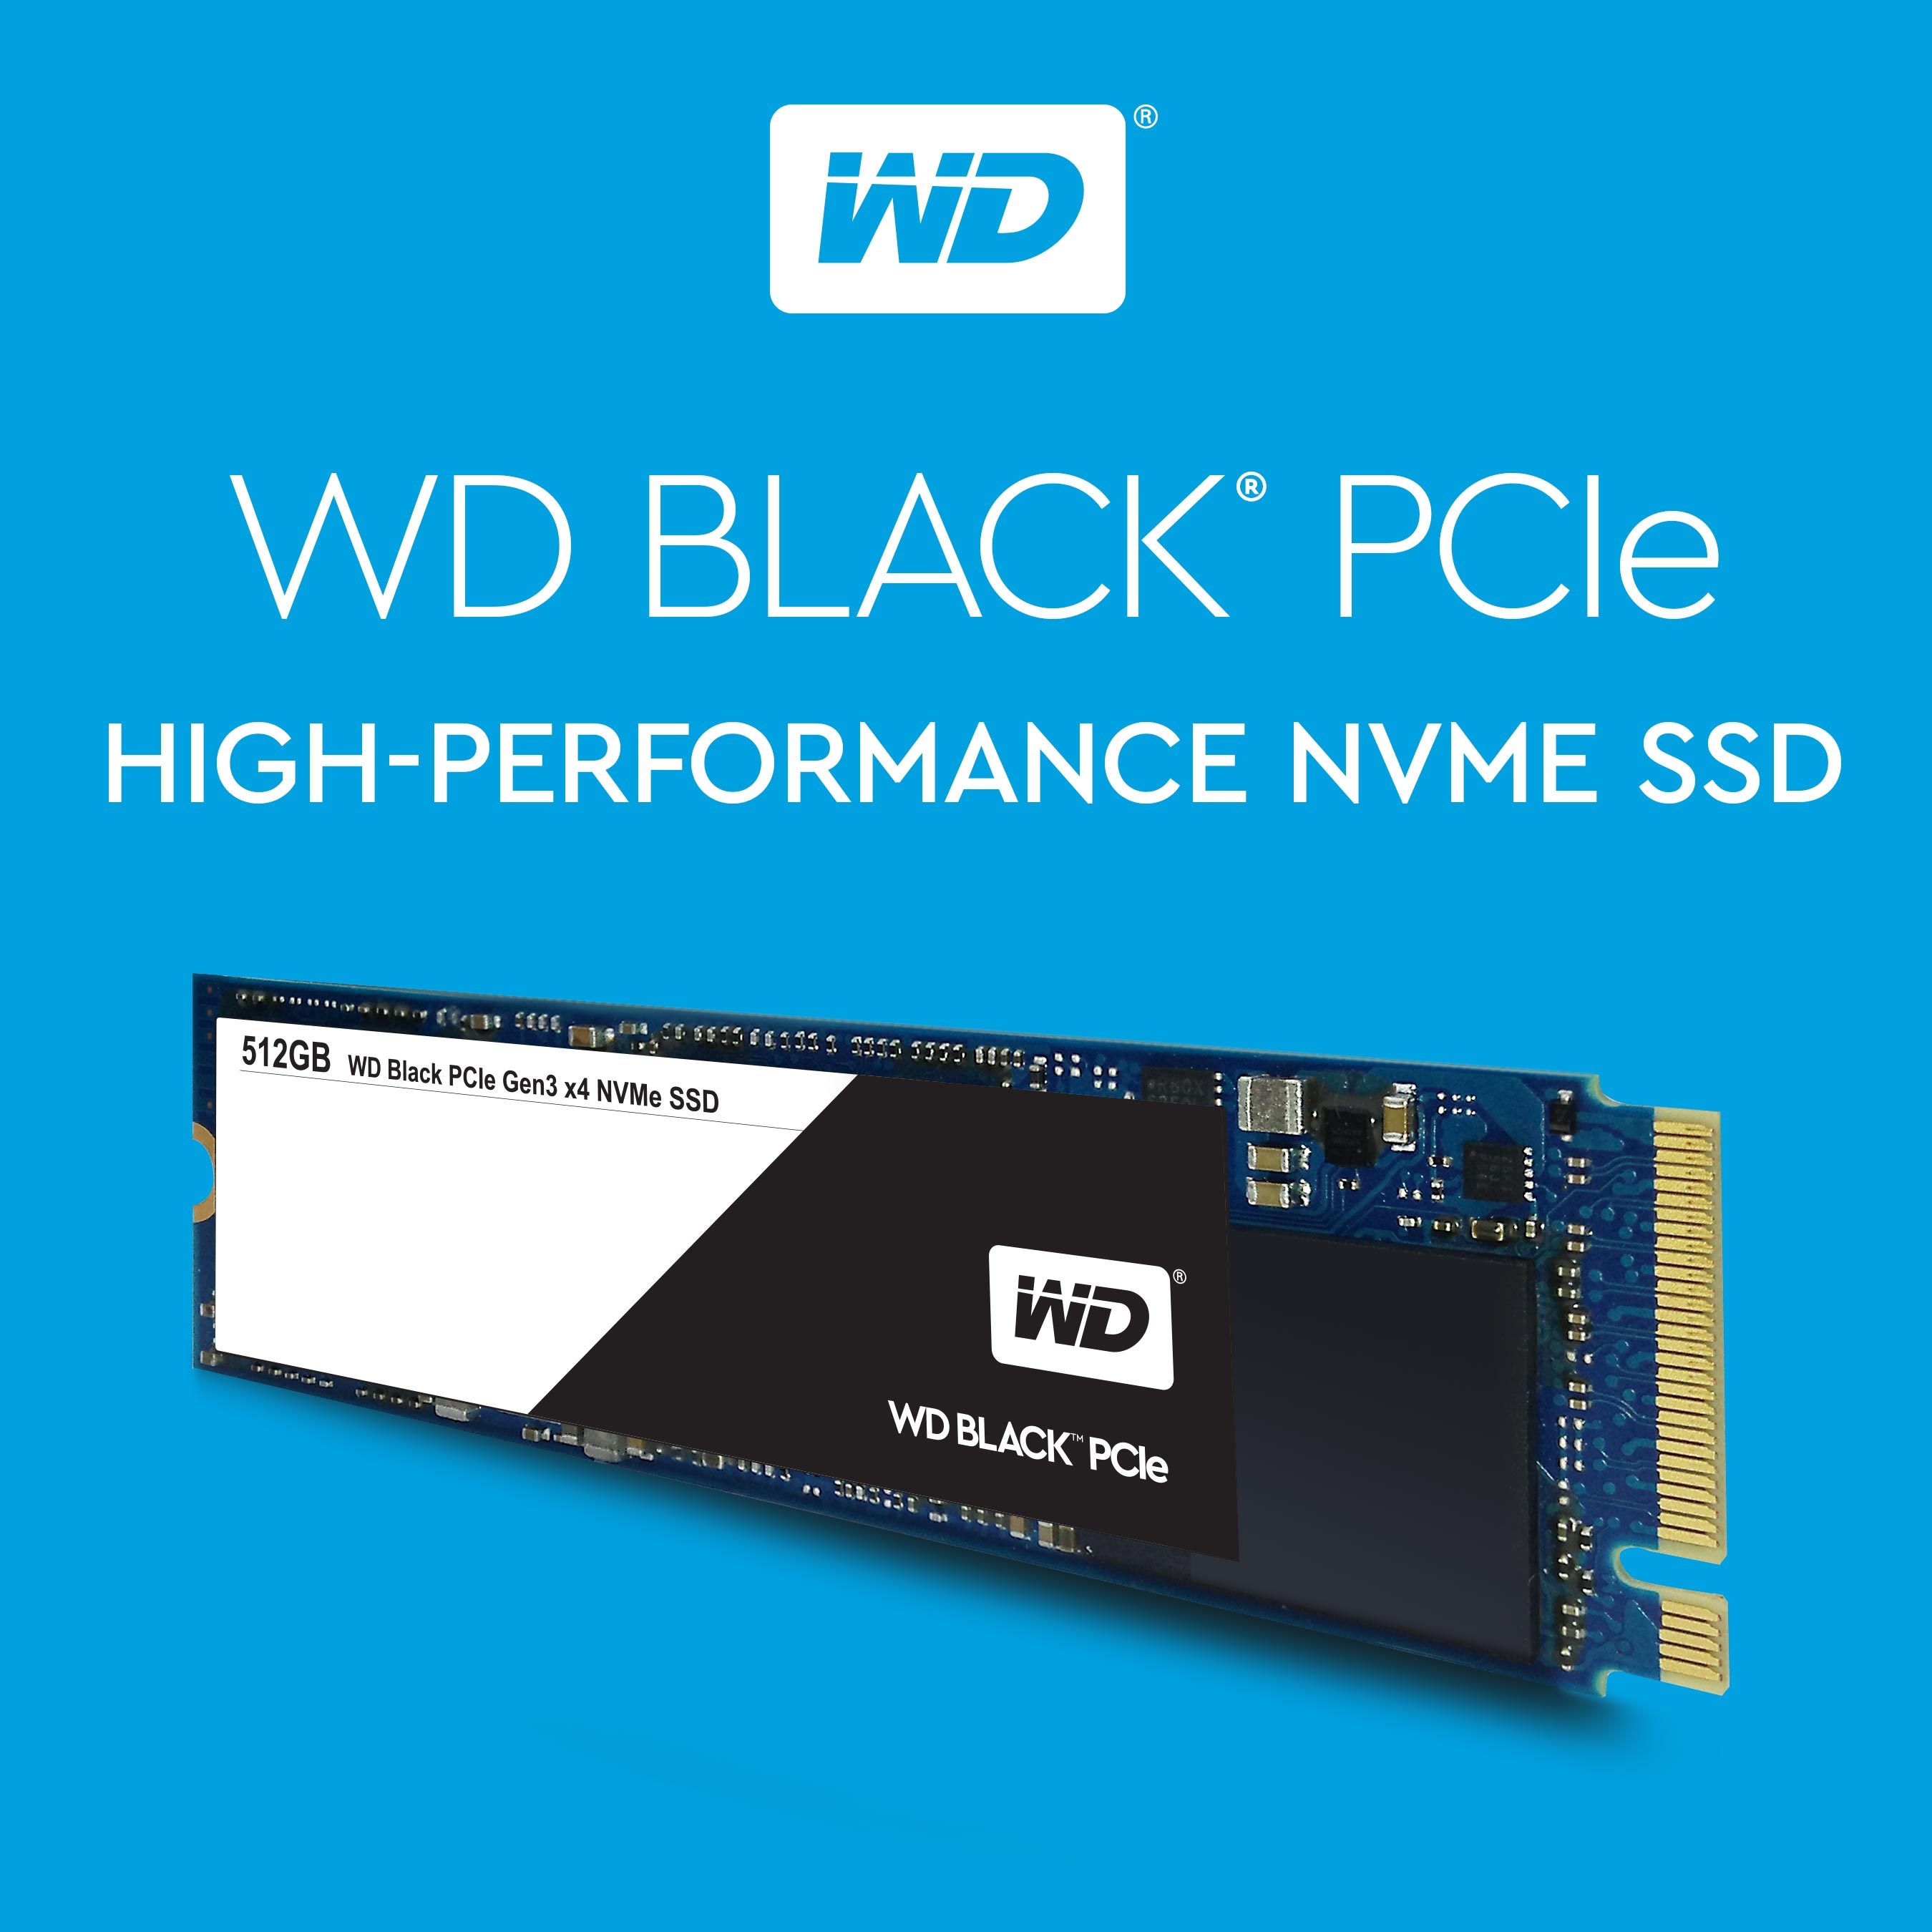 Western Digital Introduces Wd Black Pcie Solid State Drives To Accelerate Nvme Adoption Business Wire